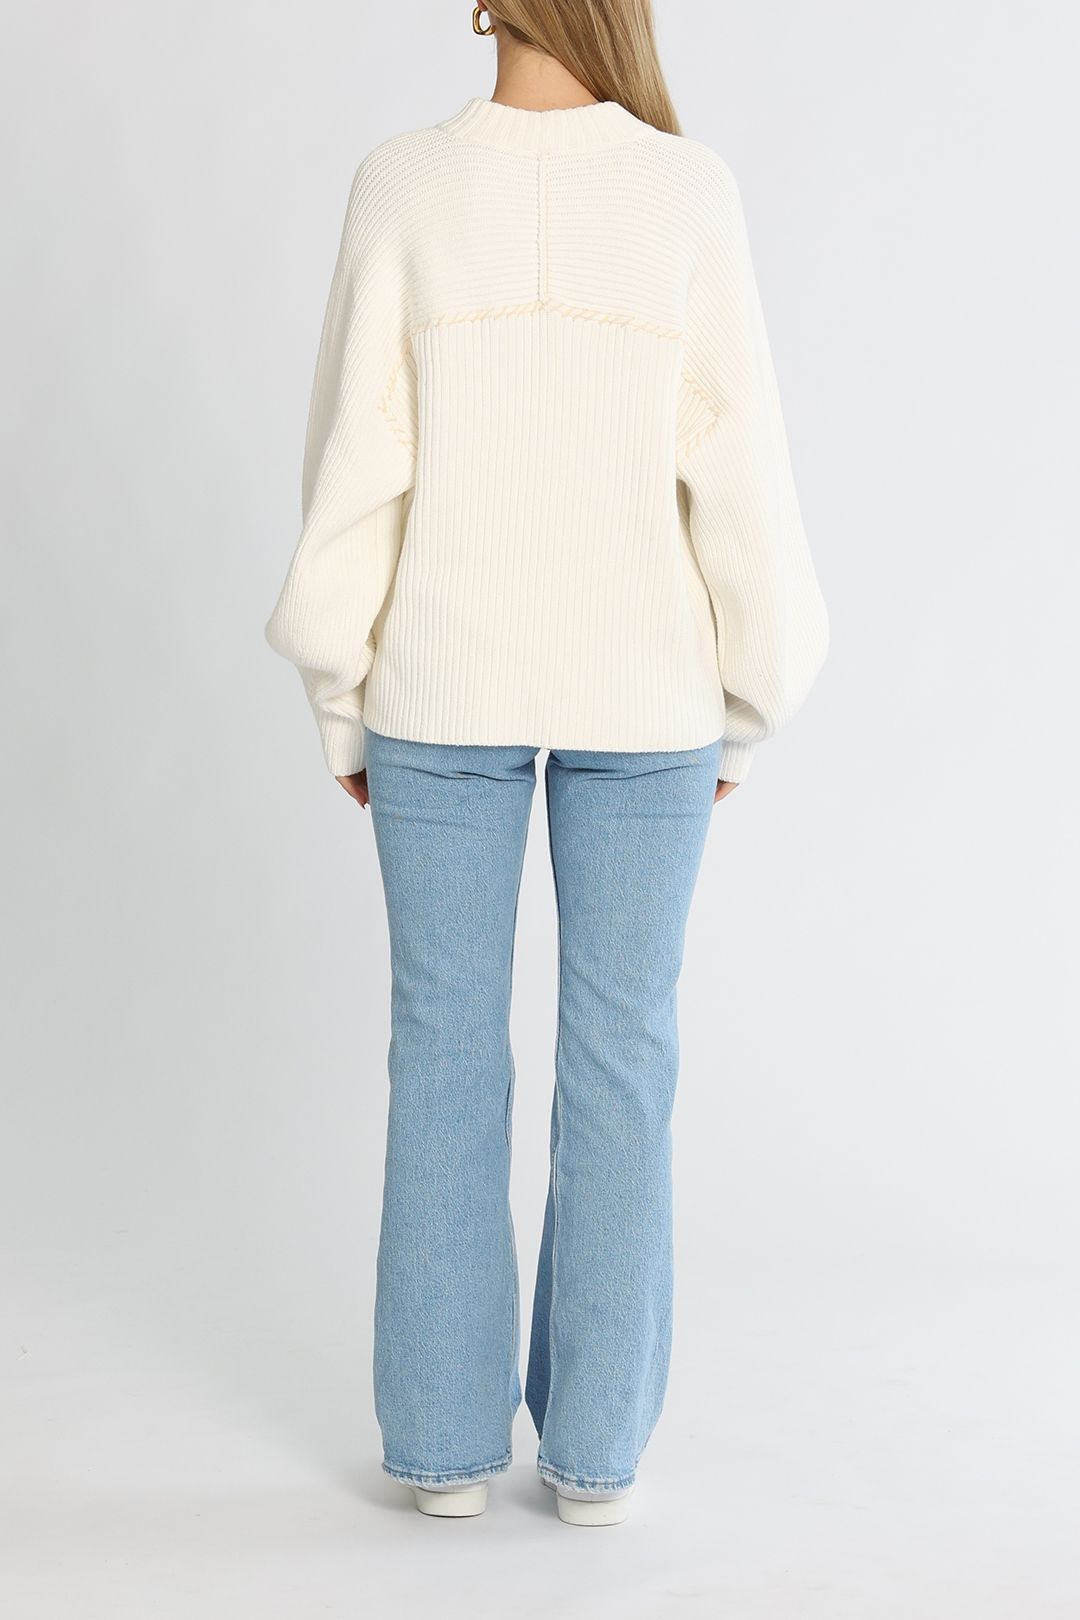 C&M Camilla and Marc Ray Knit Crew Frost Relaxed Fit